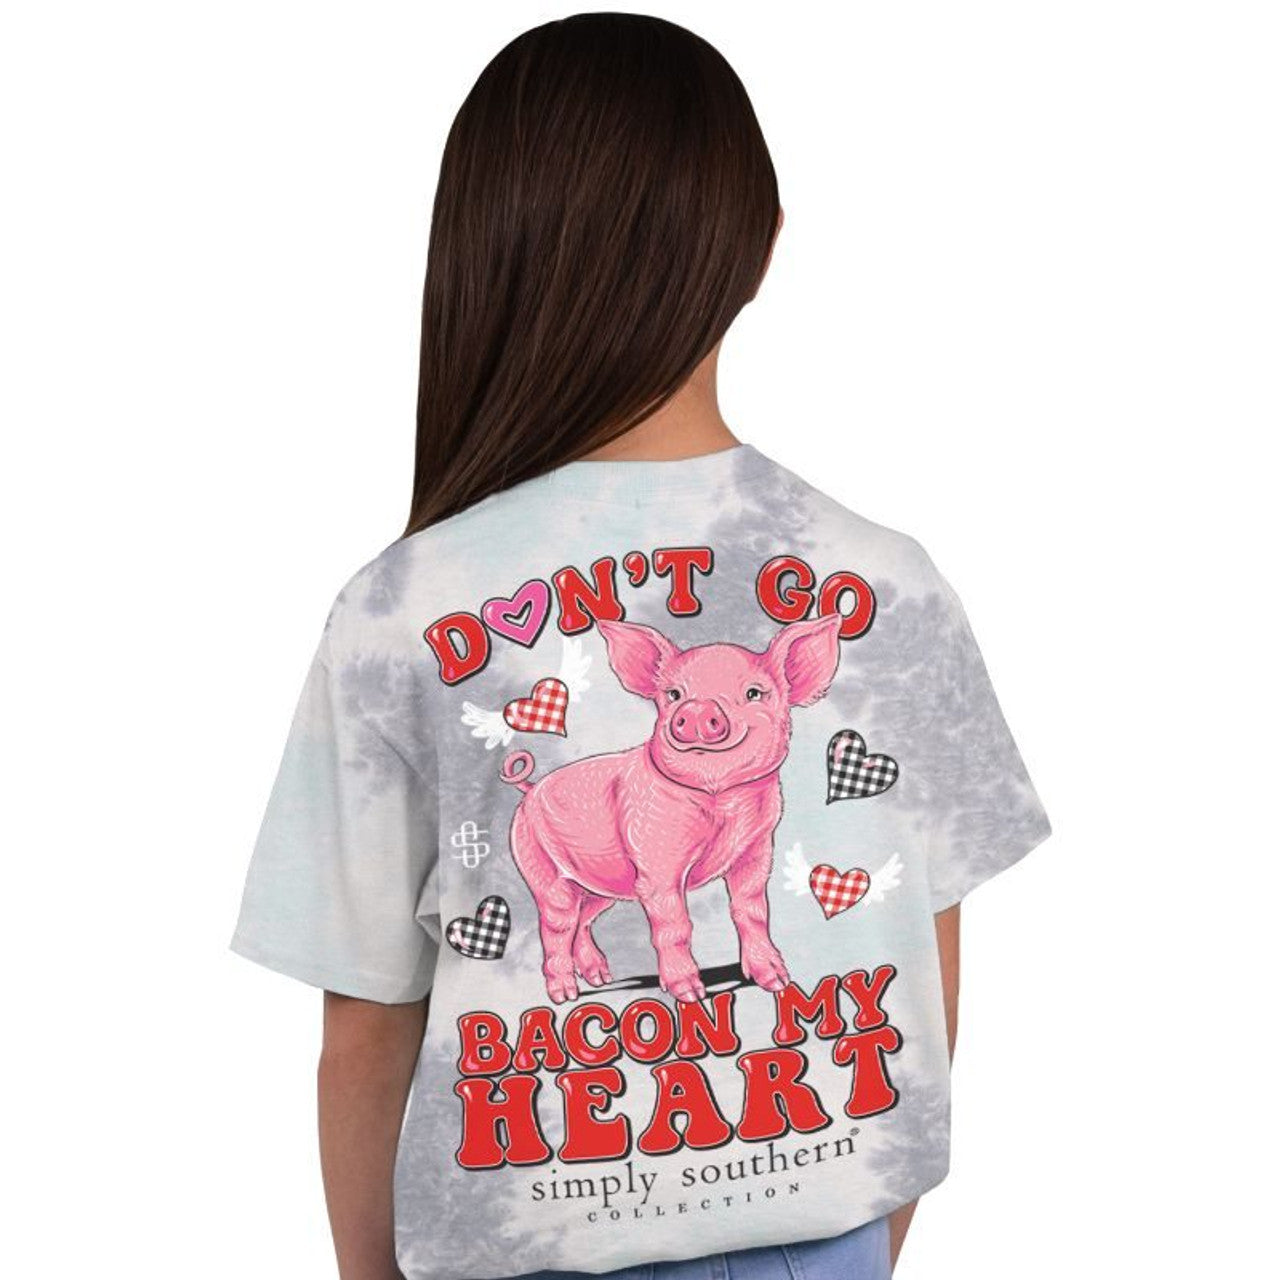 Simply Southern Bacon My Heart T-Shirt